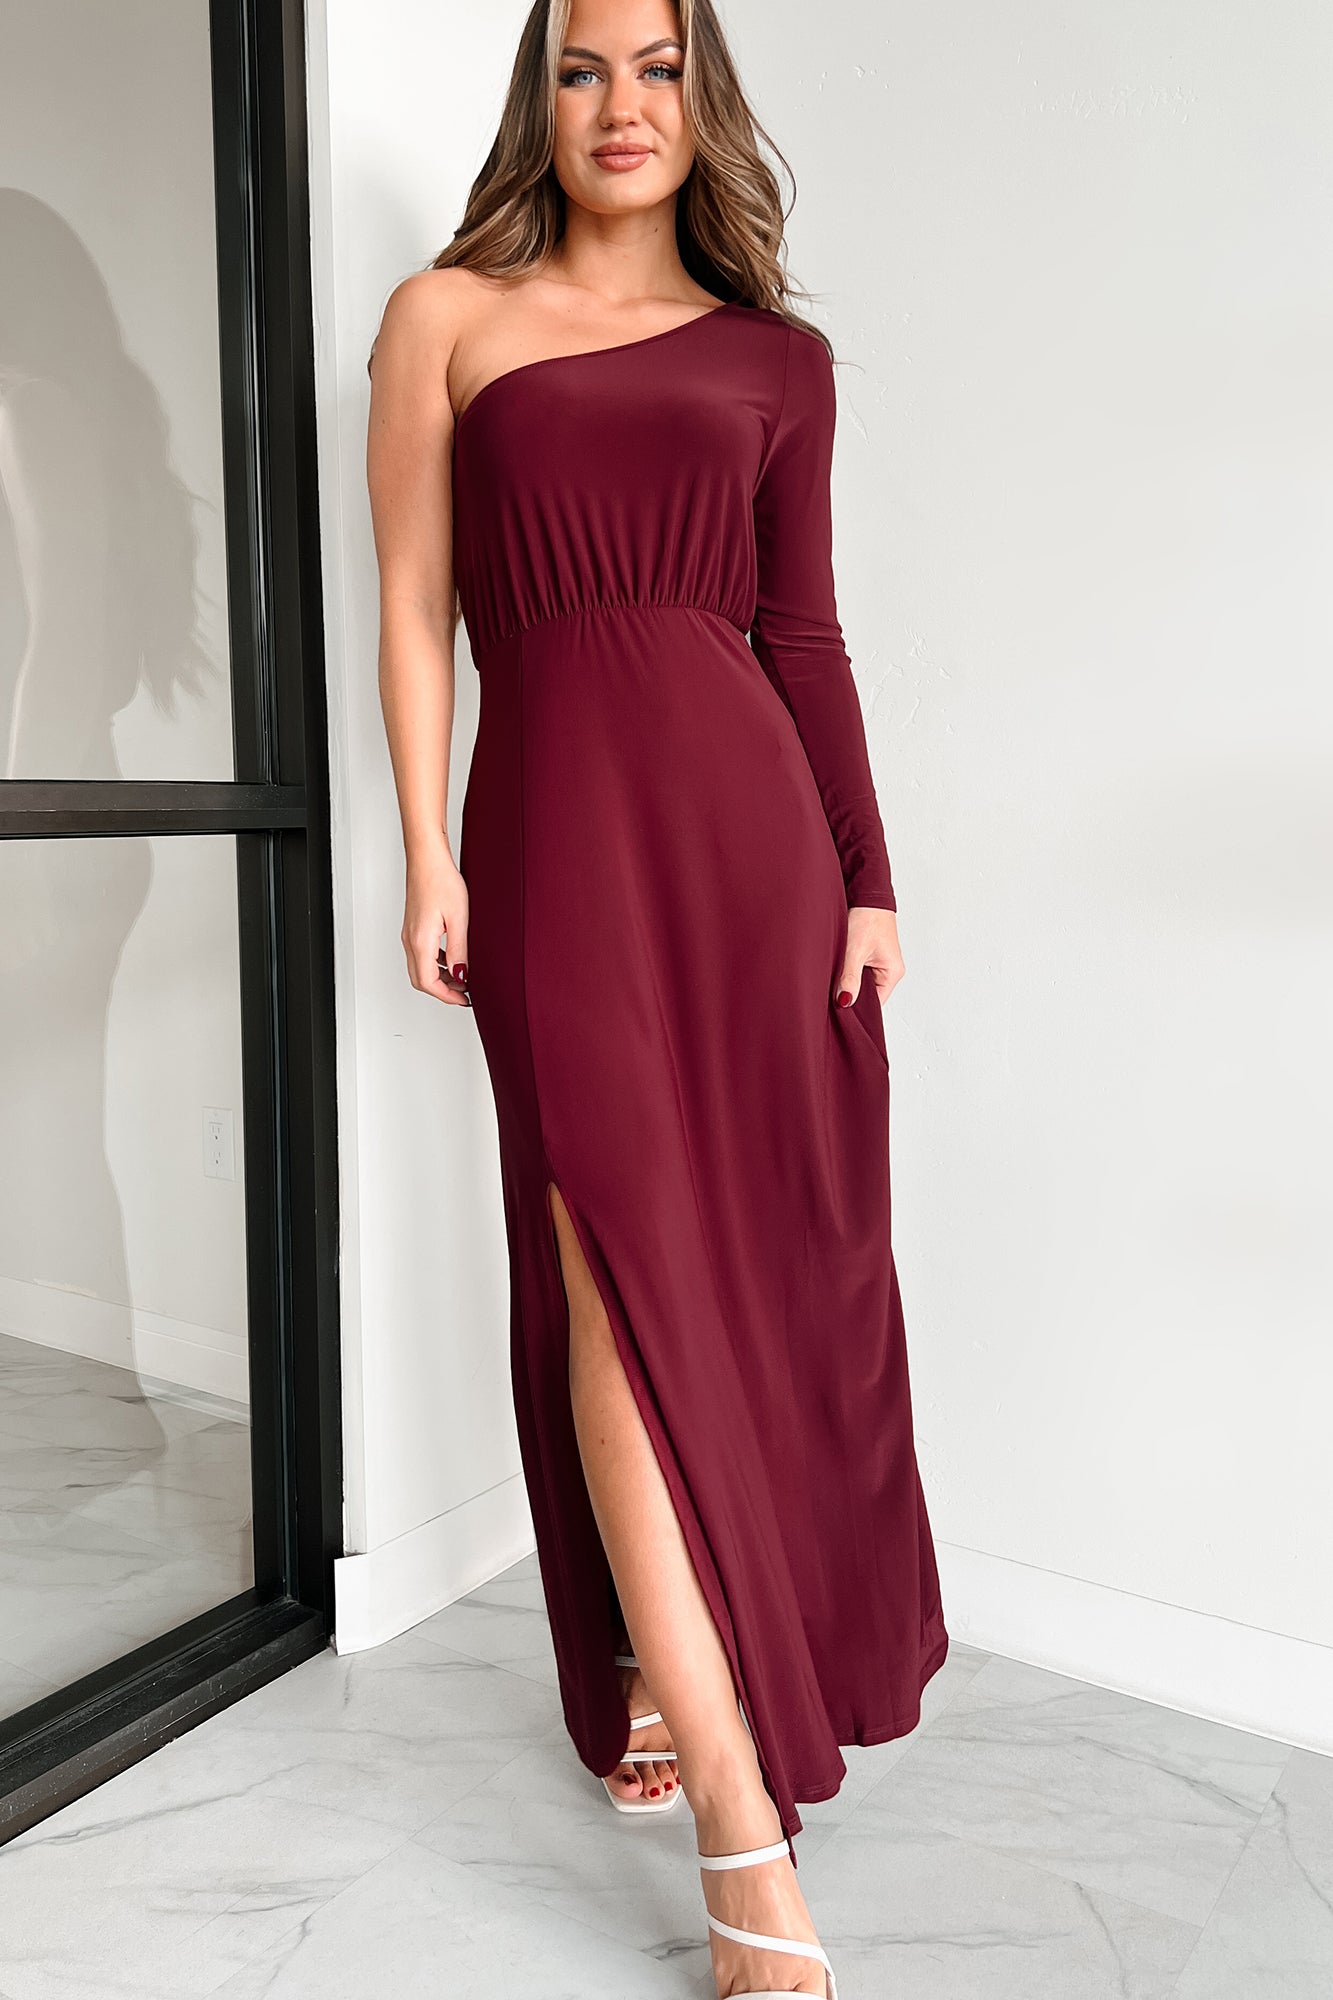 Only If It's About Me One Shoulder Maxi Dress (Burgundy) - NanaMacs